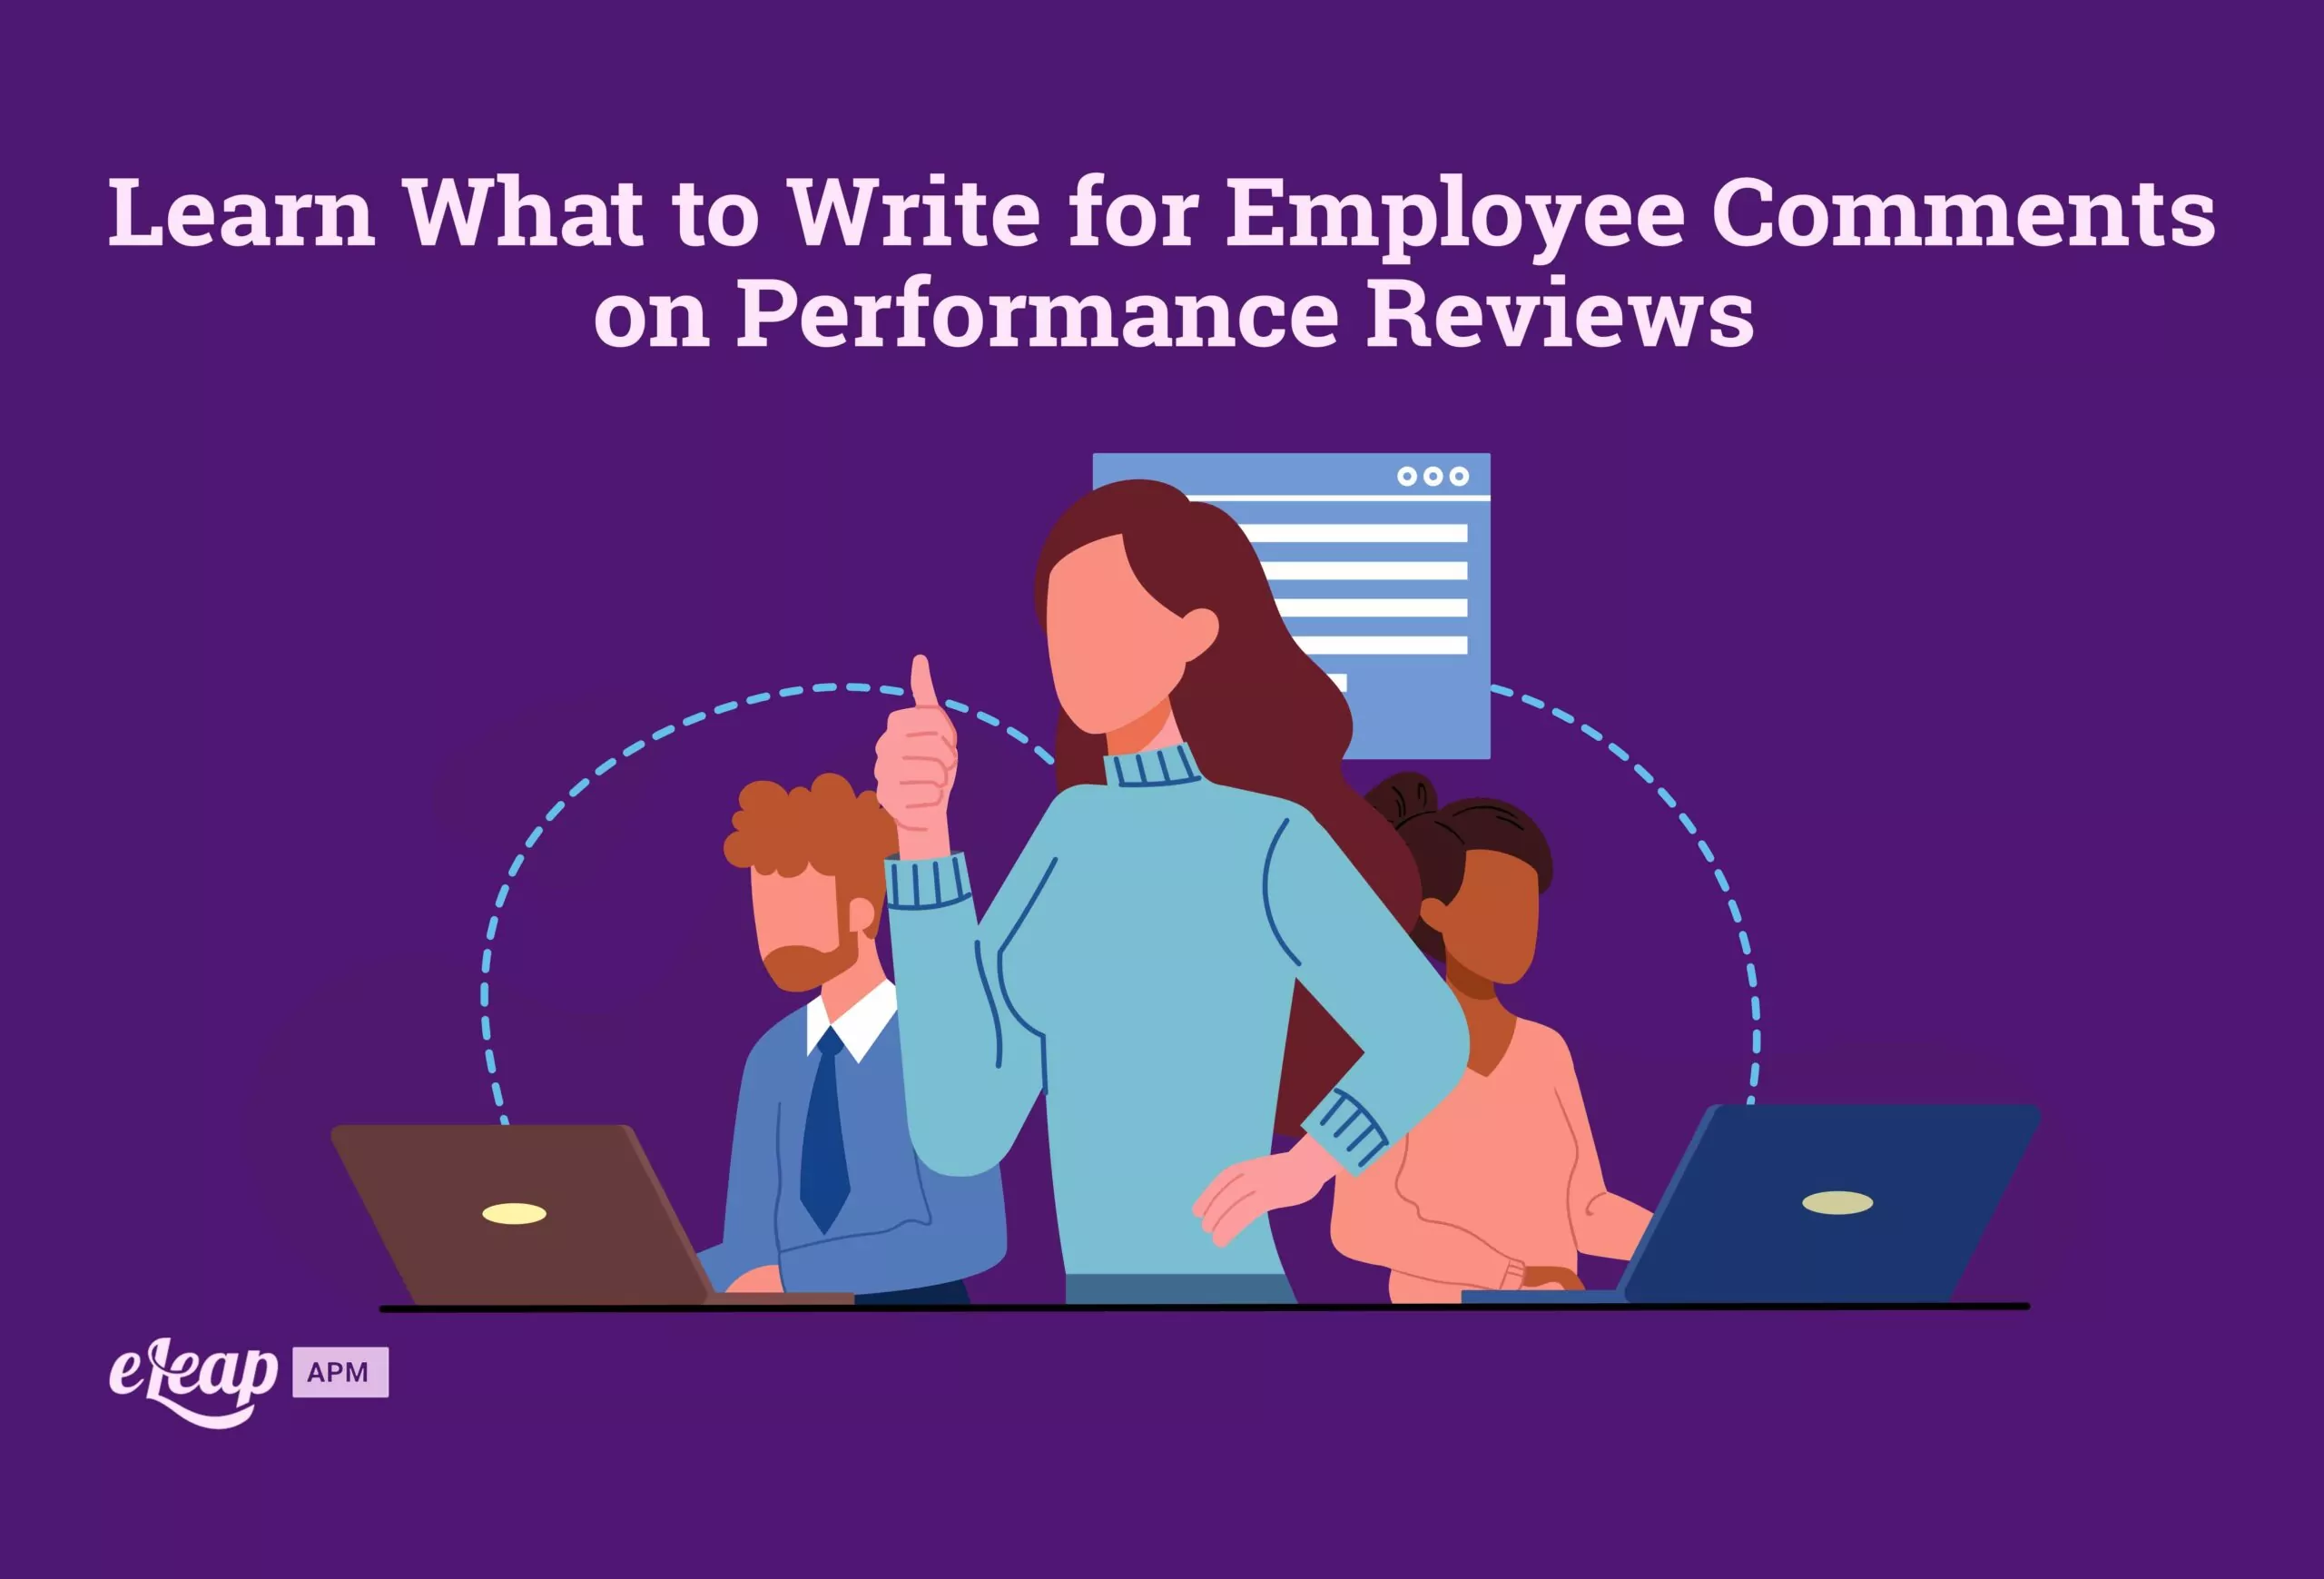 Learn What to Write for Employee Comments on Performance Reviews